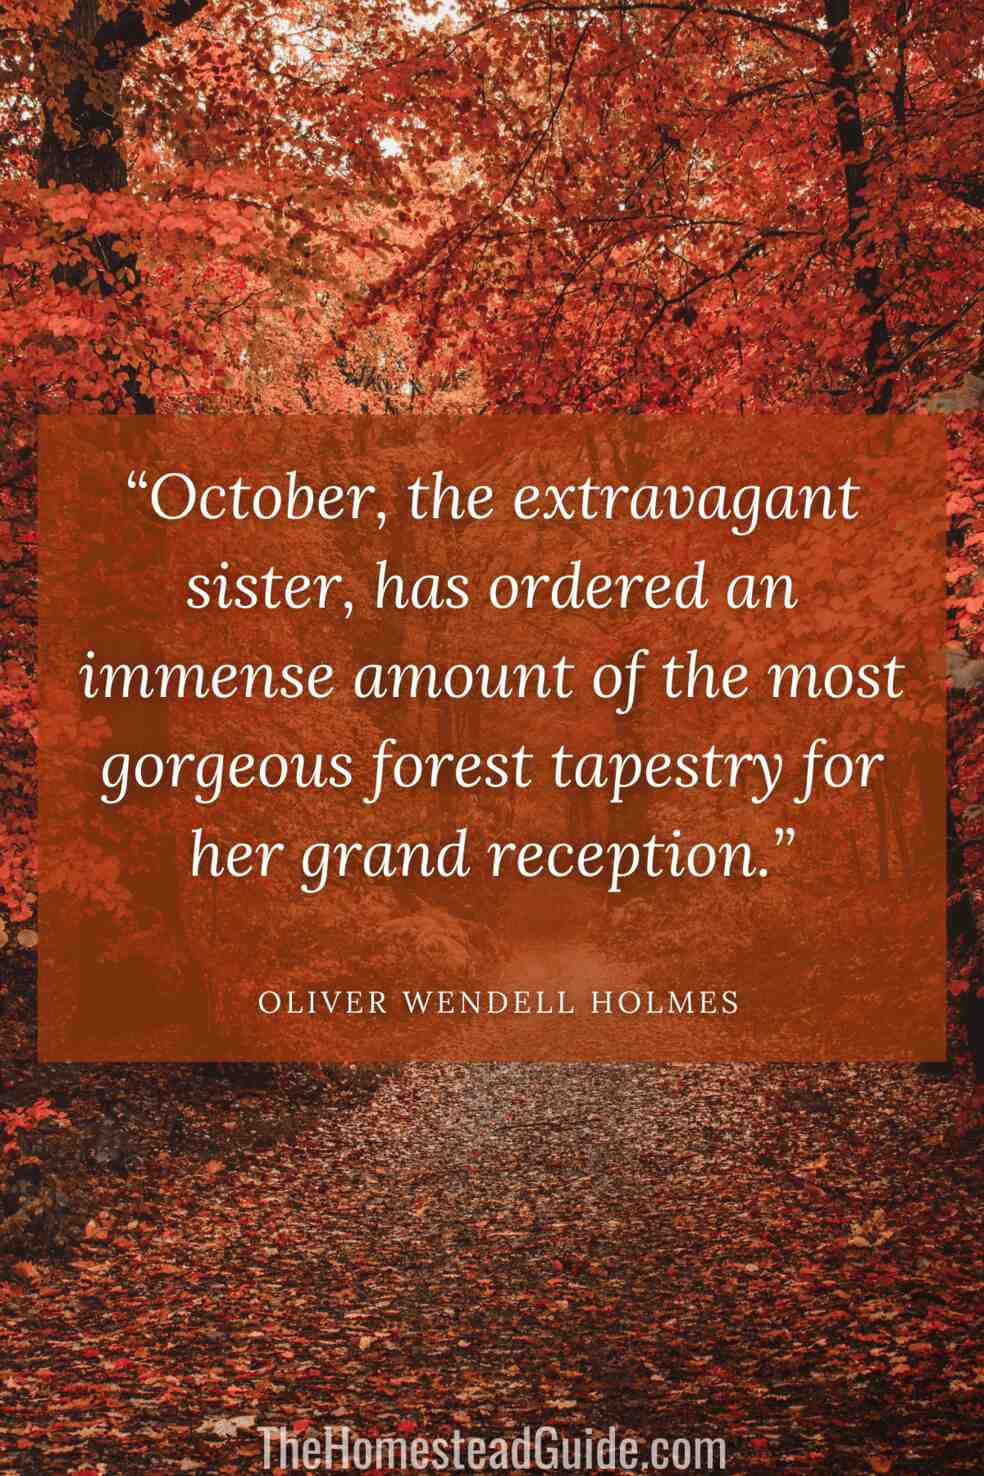 October, the extravagant sister, has ordered an immense amount of the most gorgeous forest tapestry for her grand reception.